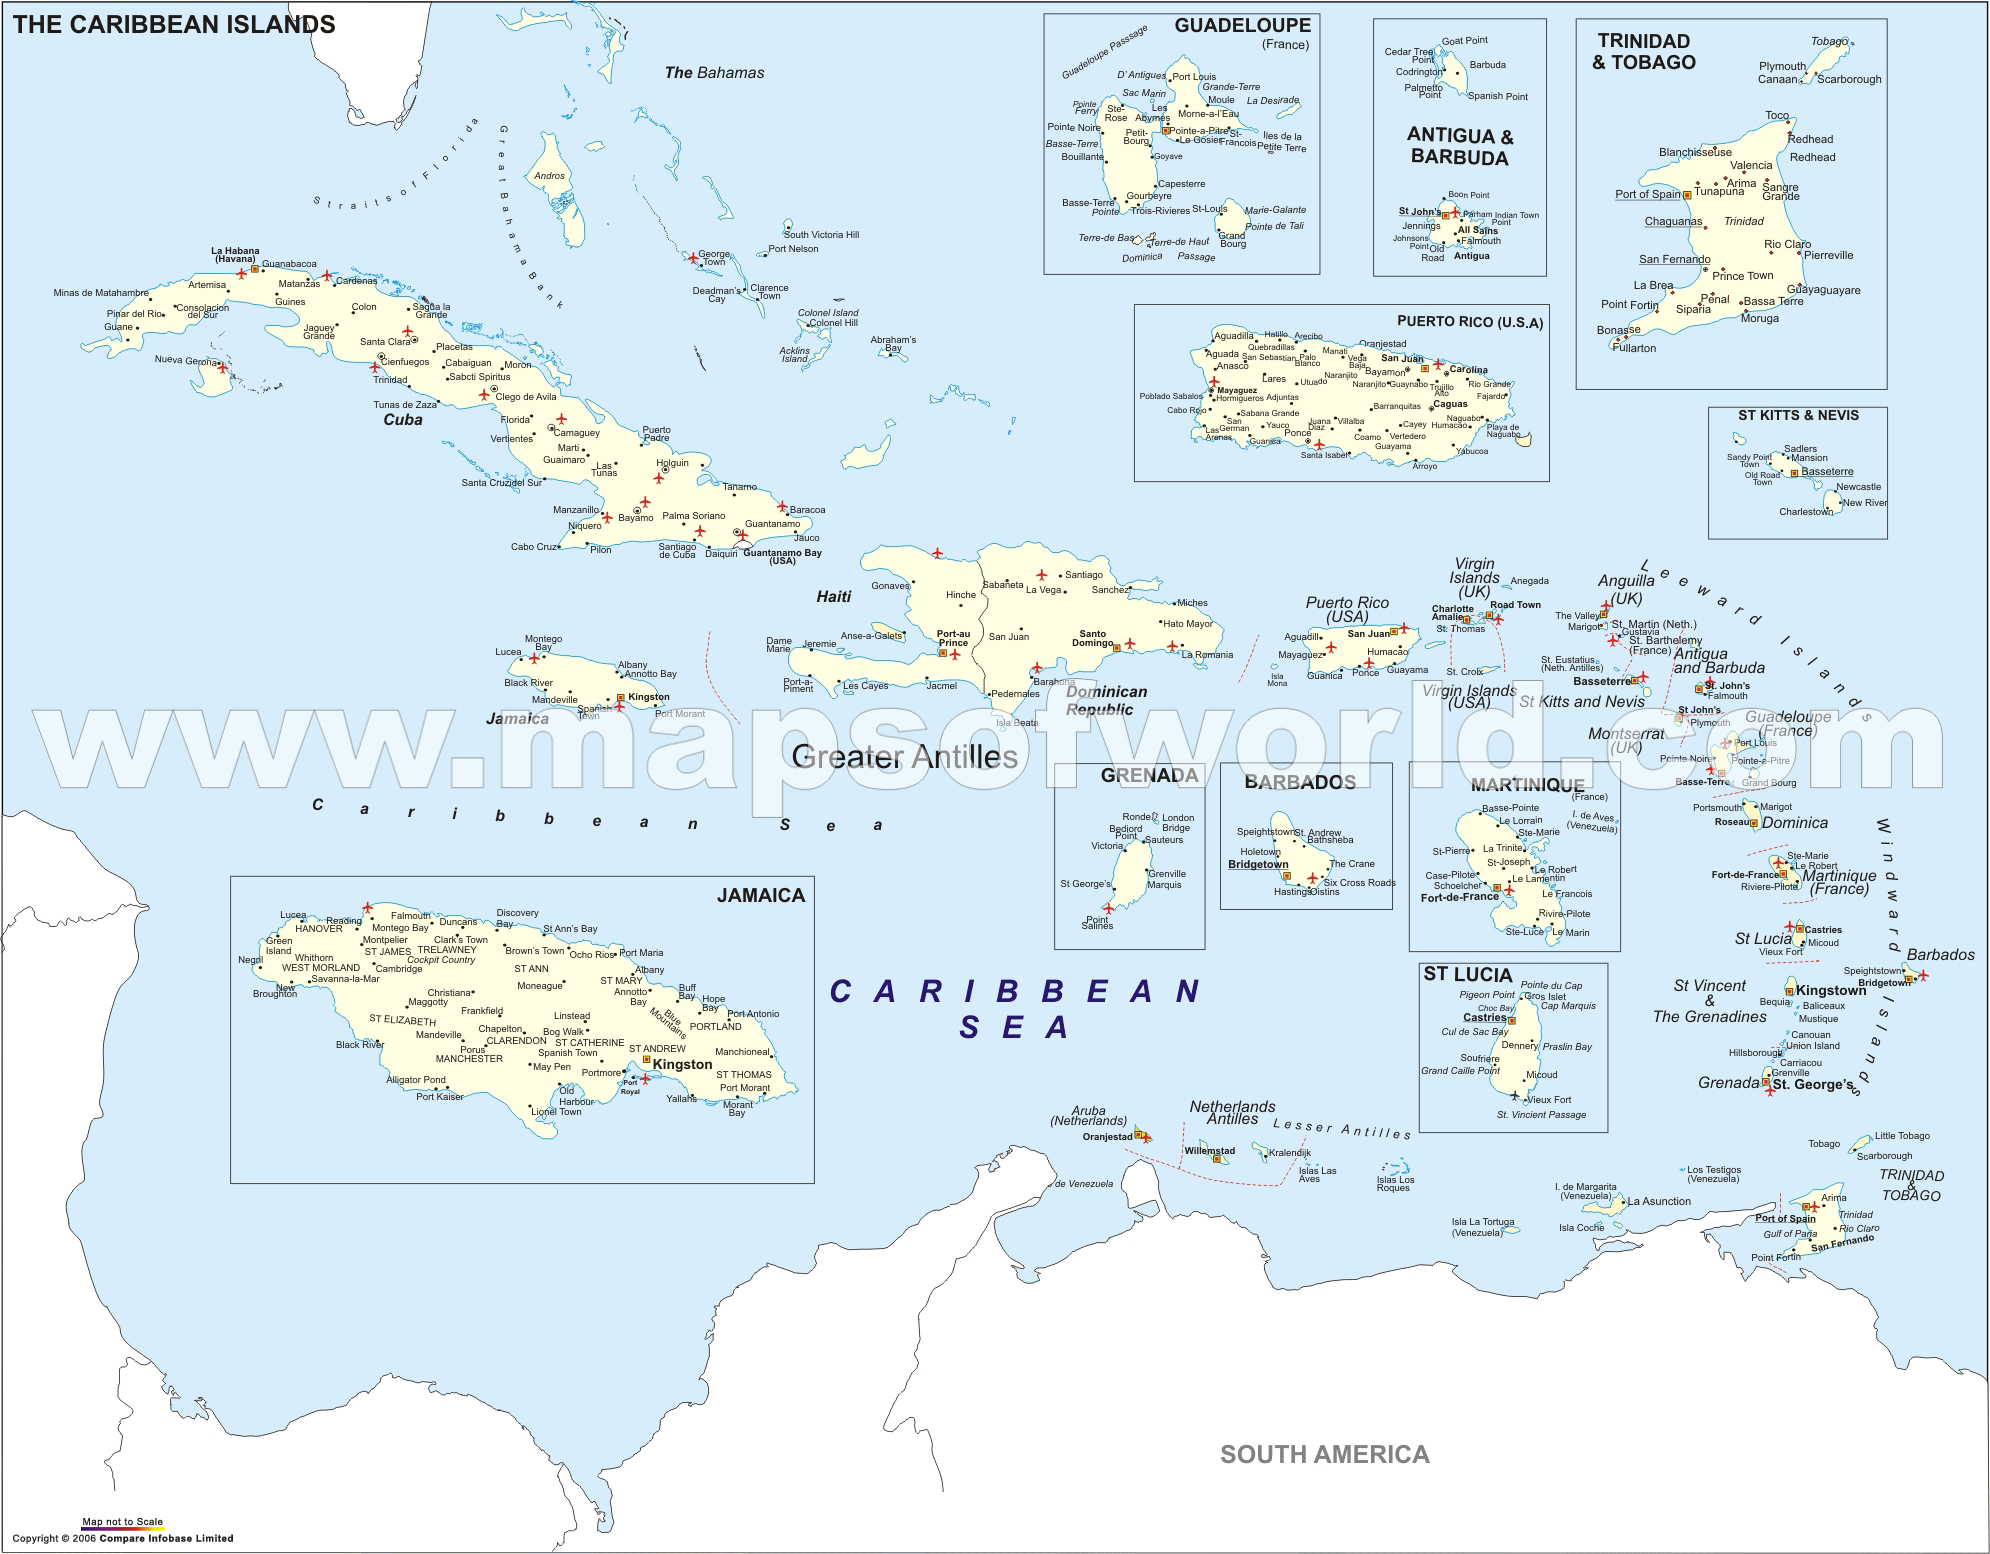 Download this Caribbean Islands Map picture